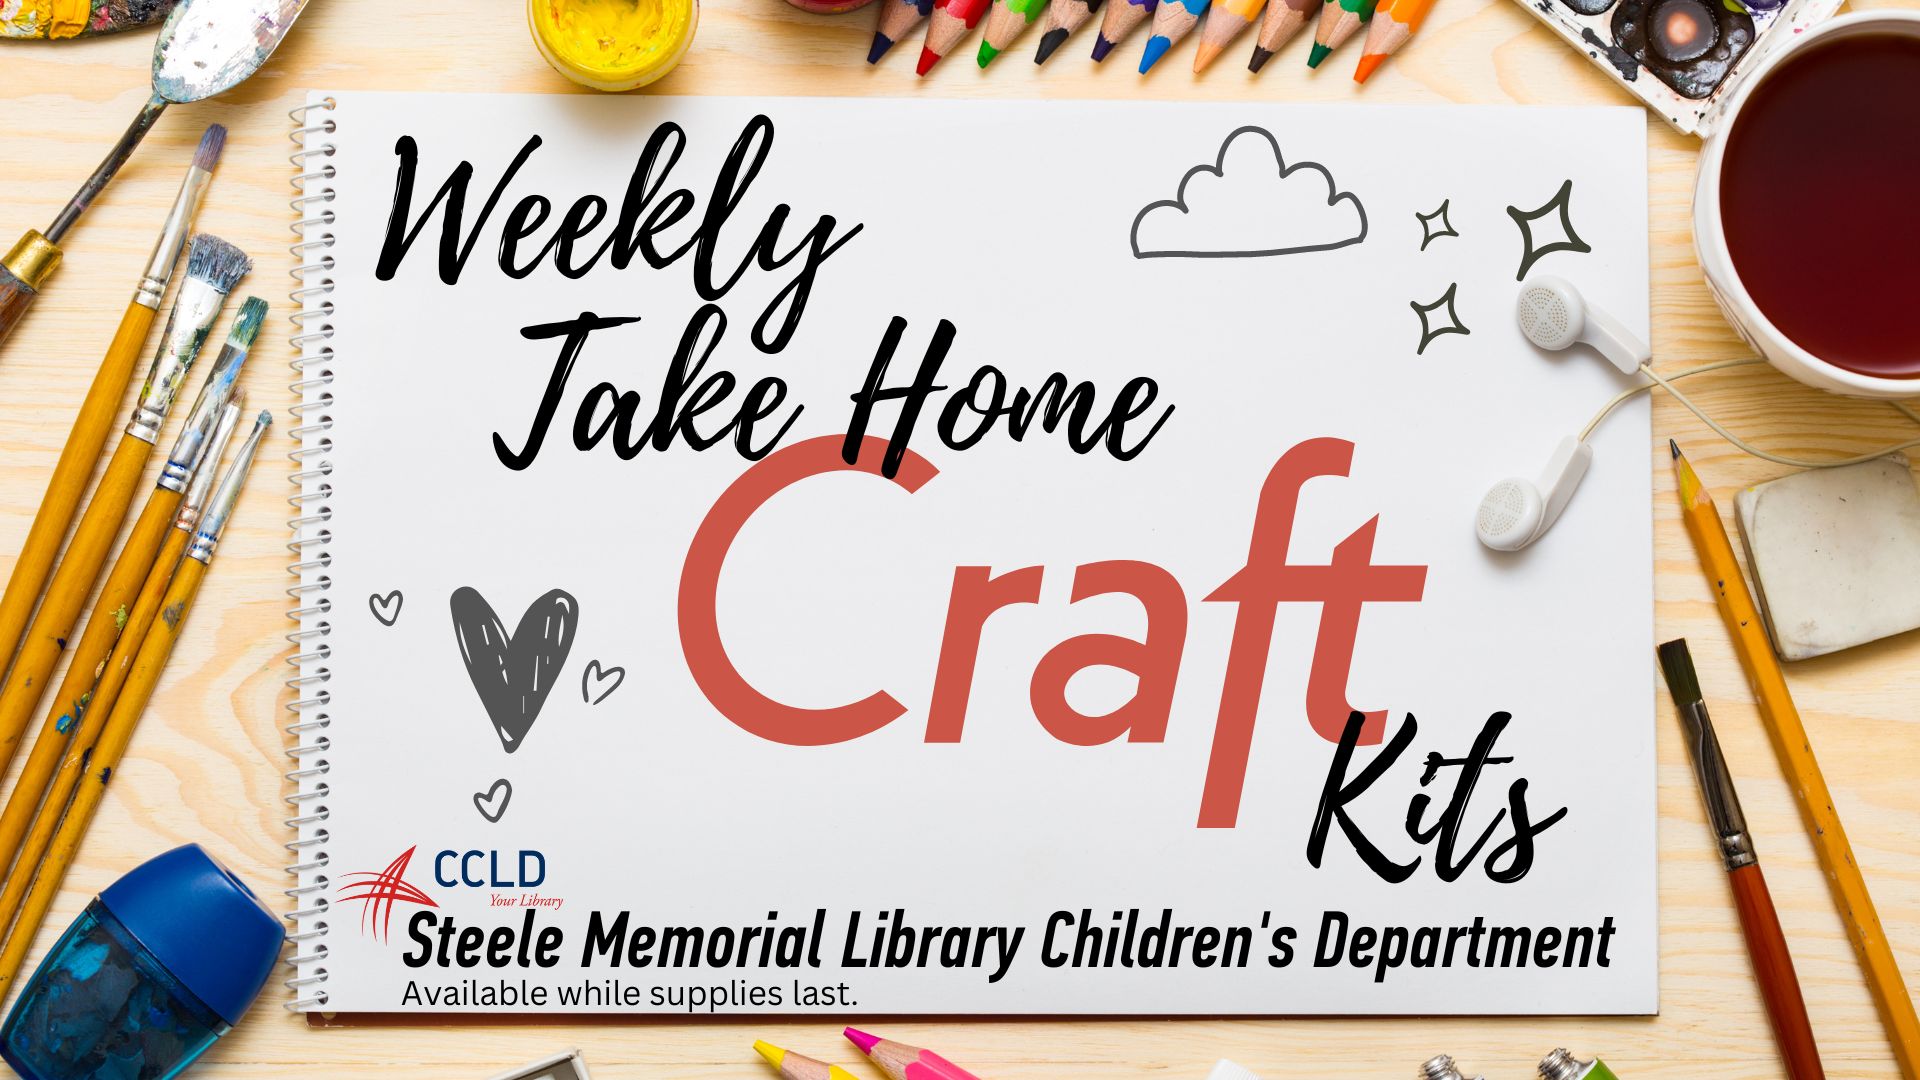 Stop by the Steele Memorial Library Children's Department to grab a weekly crafts kit.  Beginning Monday October 3rd, while supplies last!